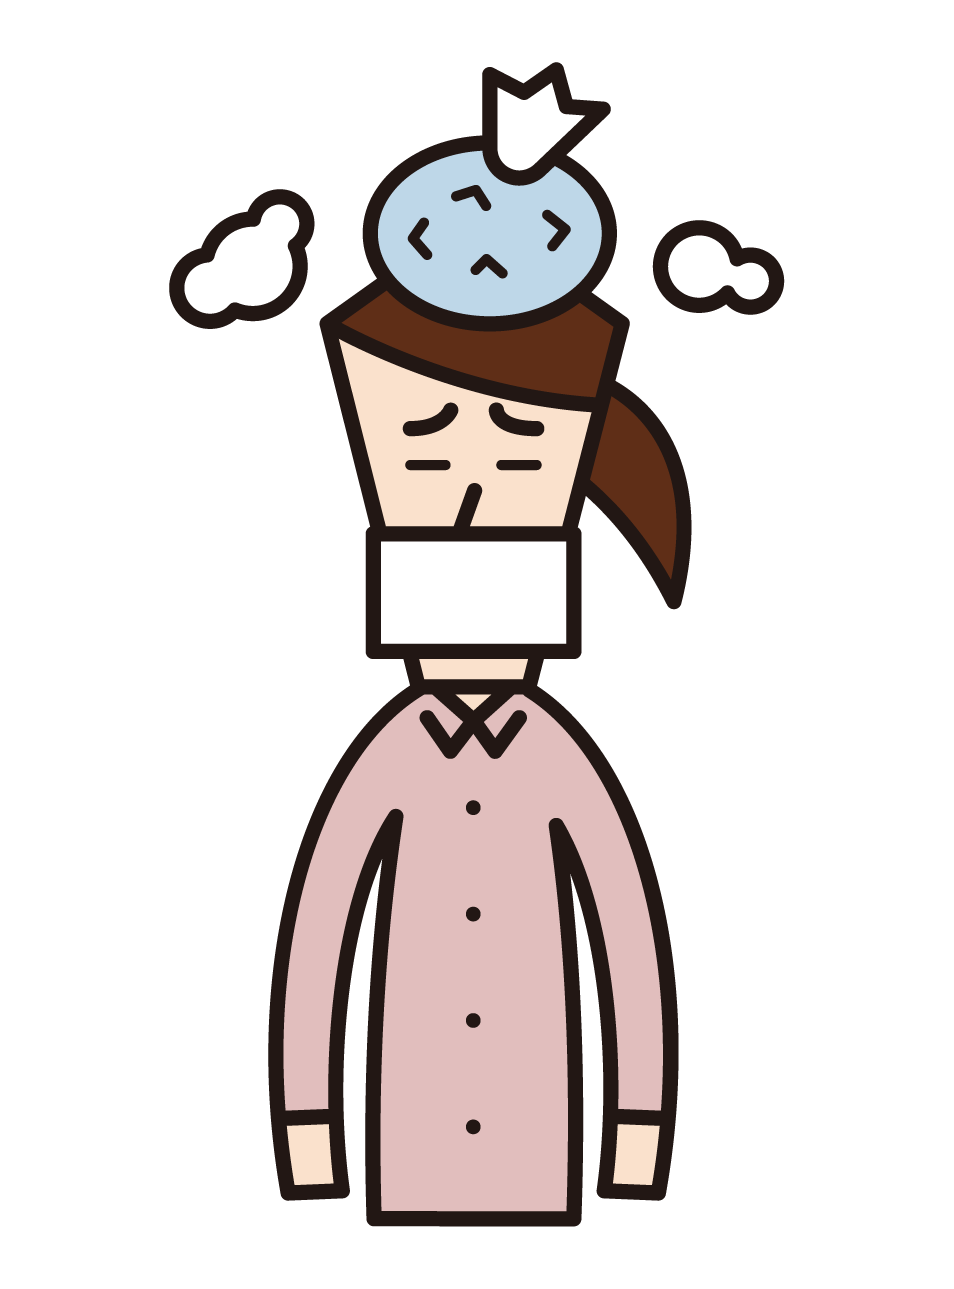 Illustration of a woman who has a cold and cools her head